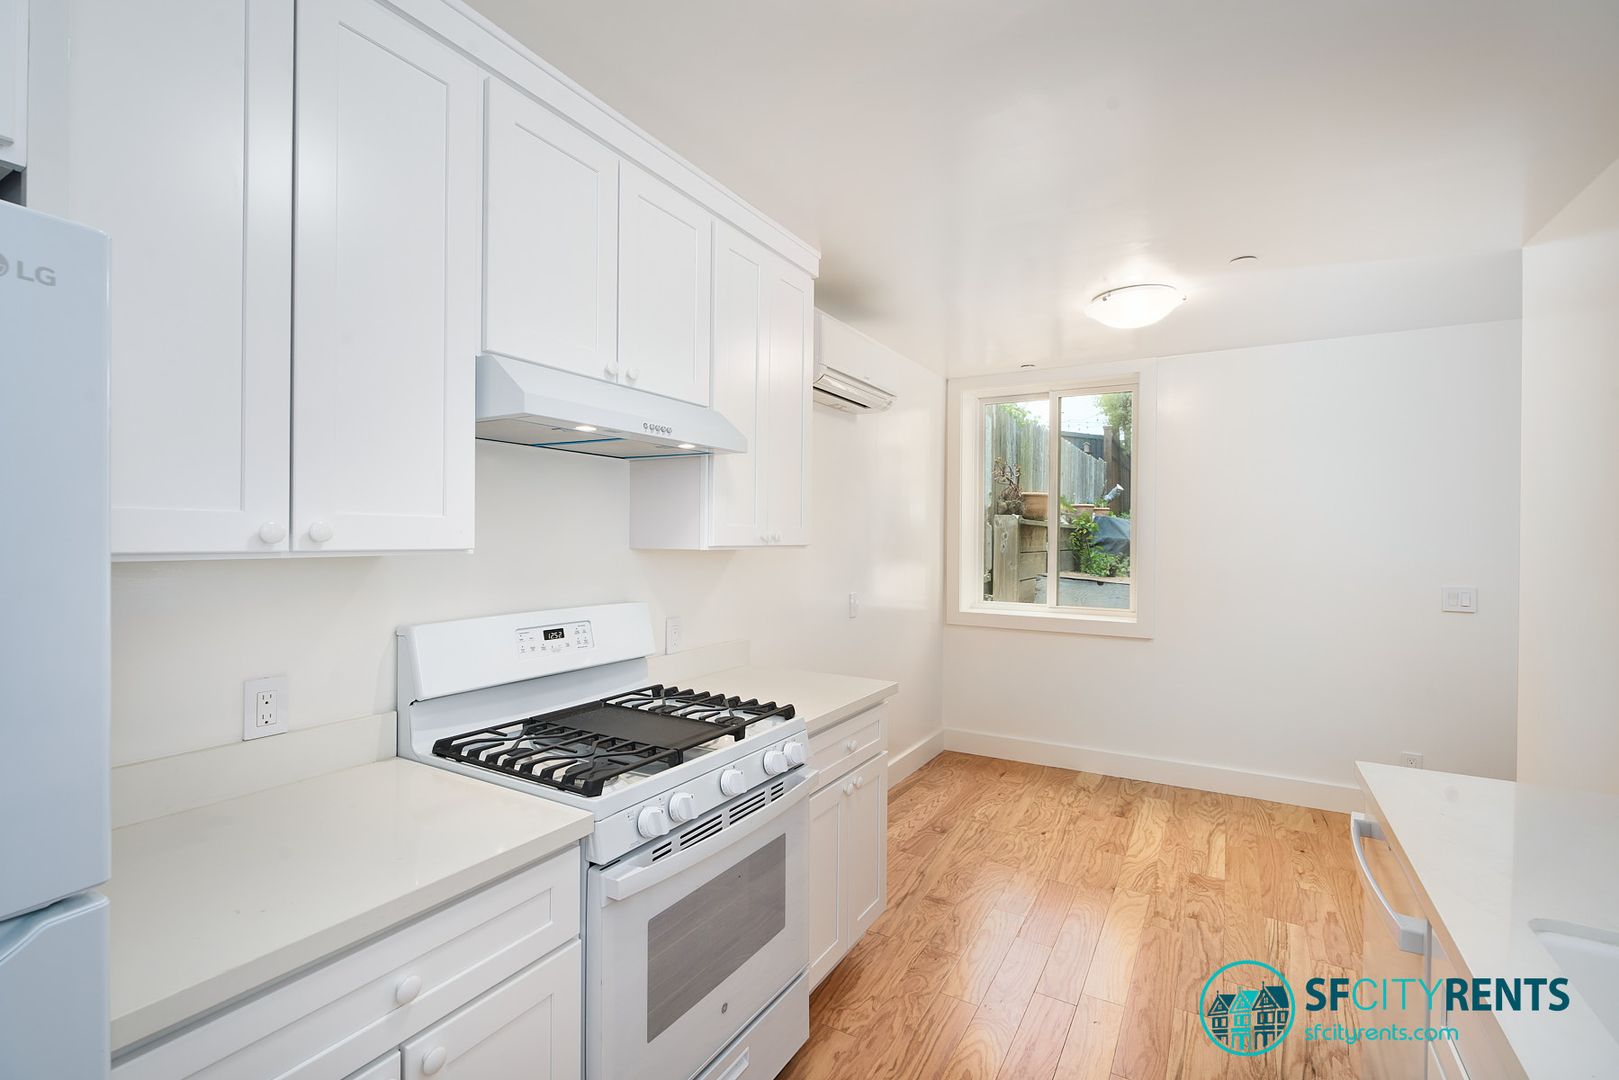 Outer Sunset: Freshly Remodeled 2-ROOM Studio w/ Shared Laundry, Yard & Private Patio